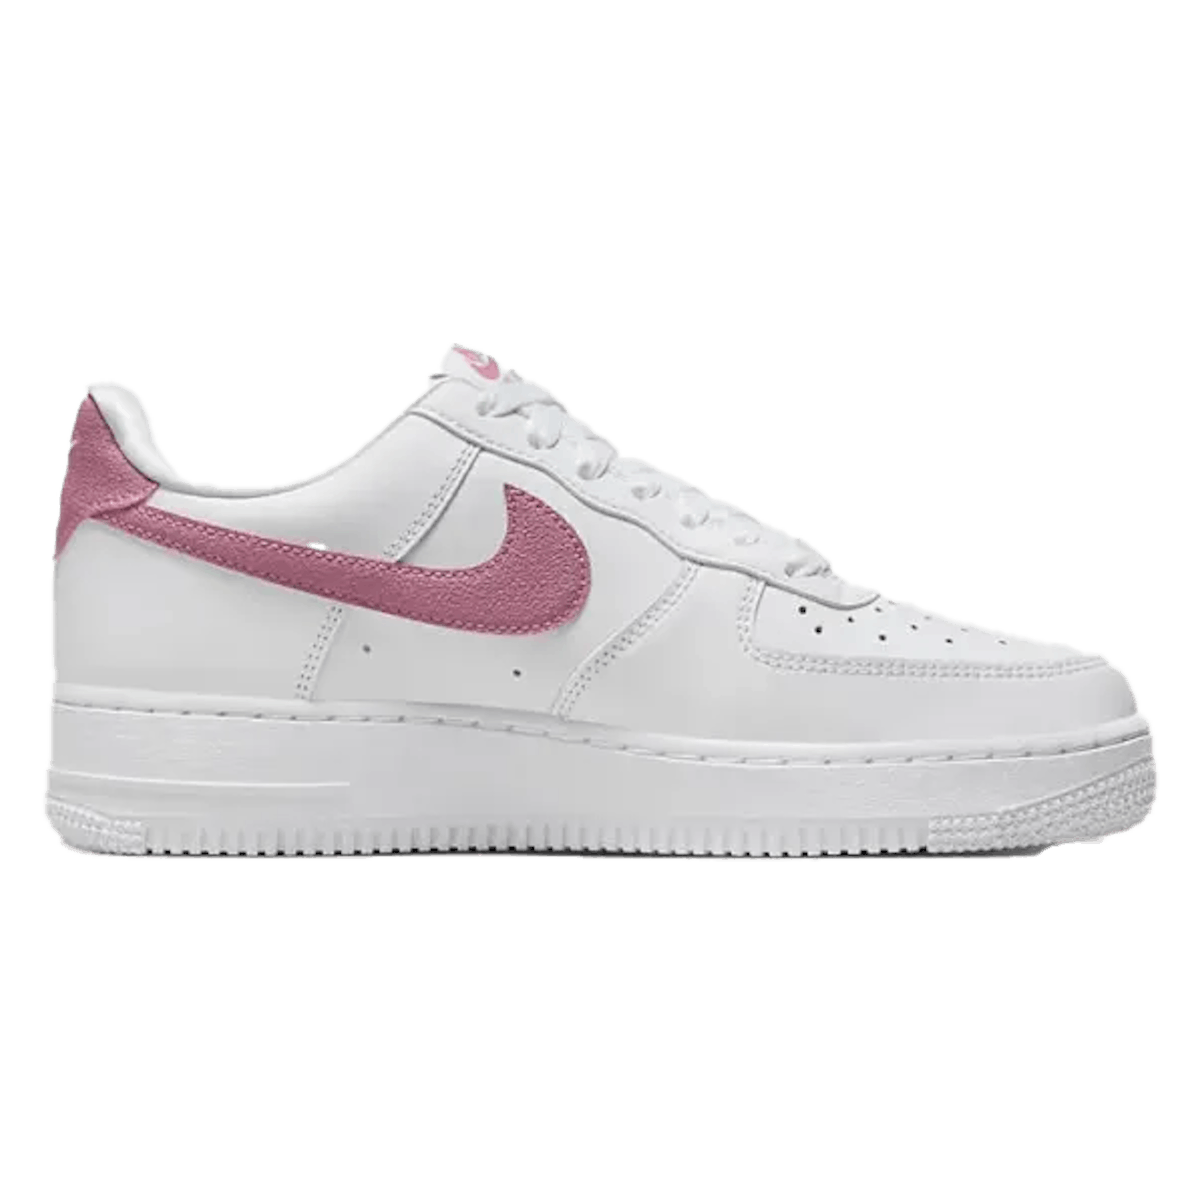 Nike Air Force 1 '07 Low Wmns “Desert Berry”